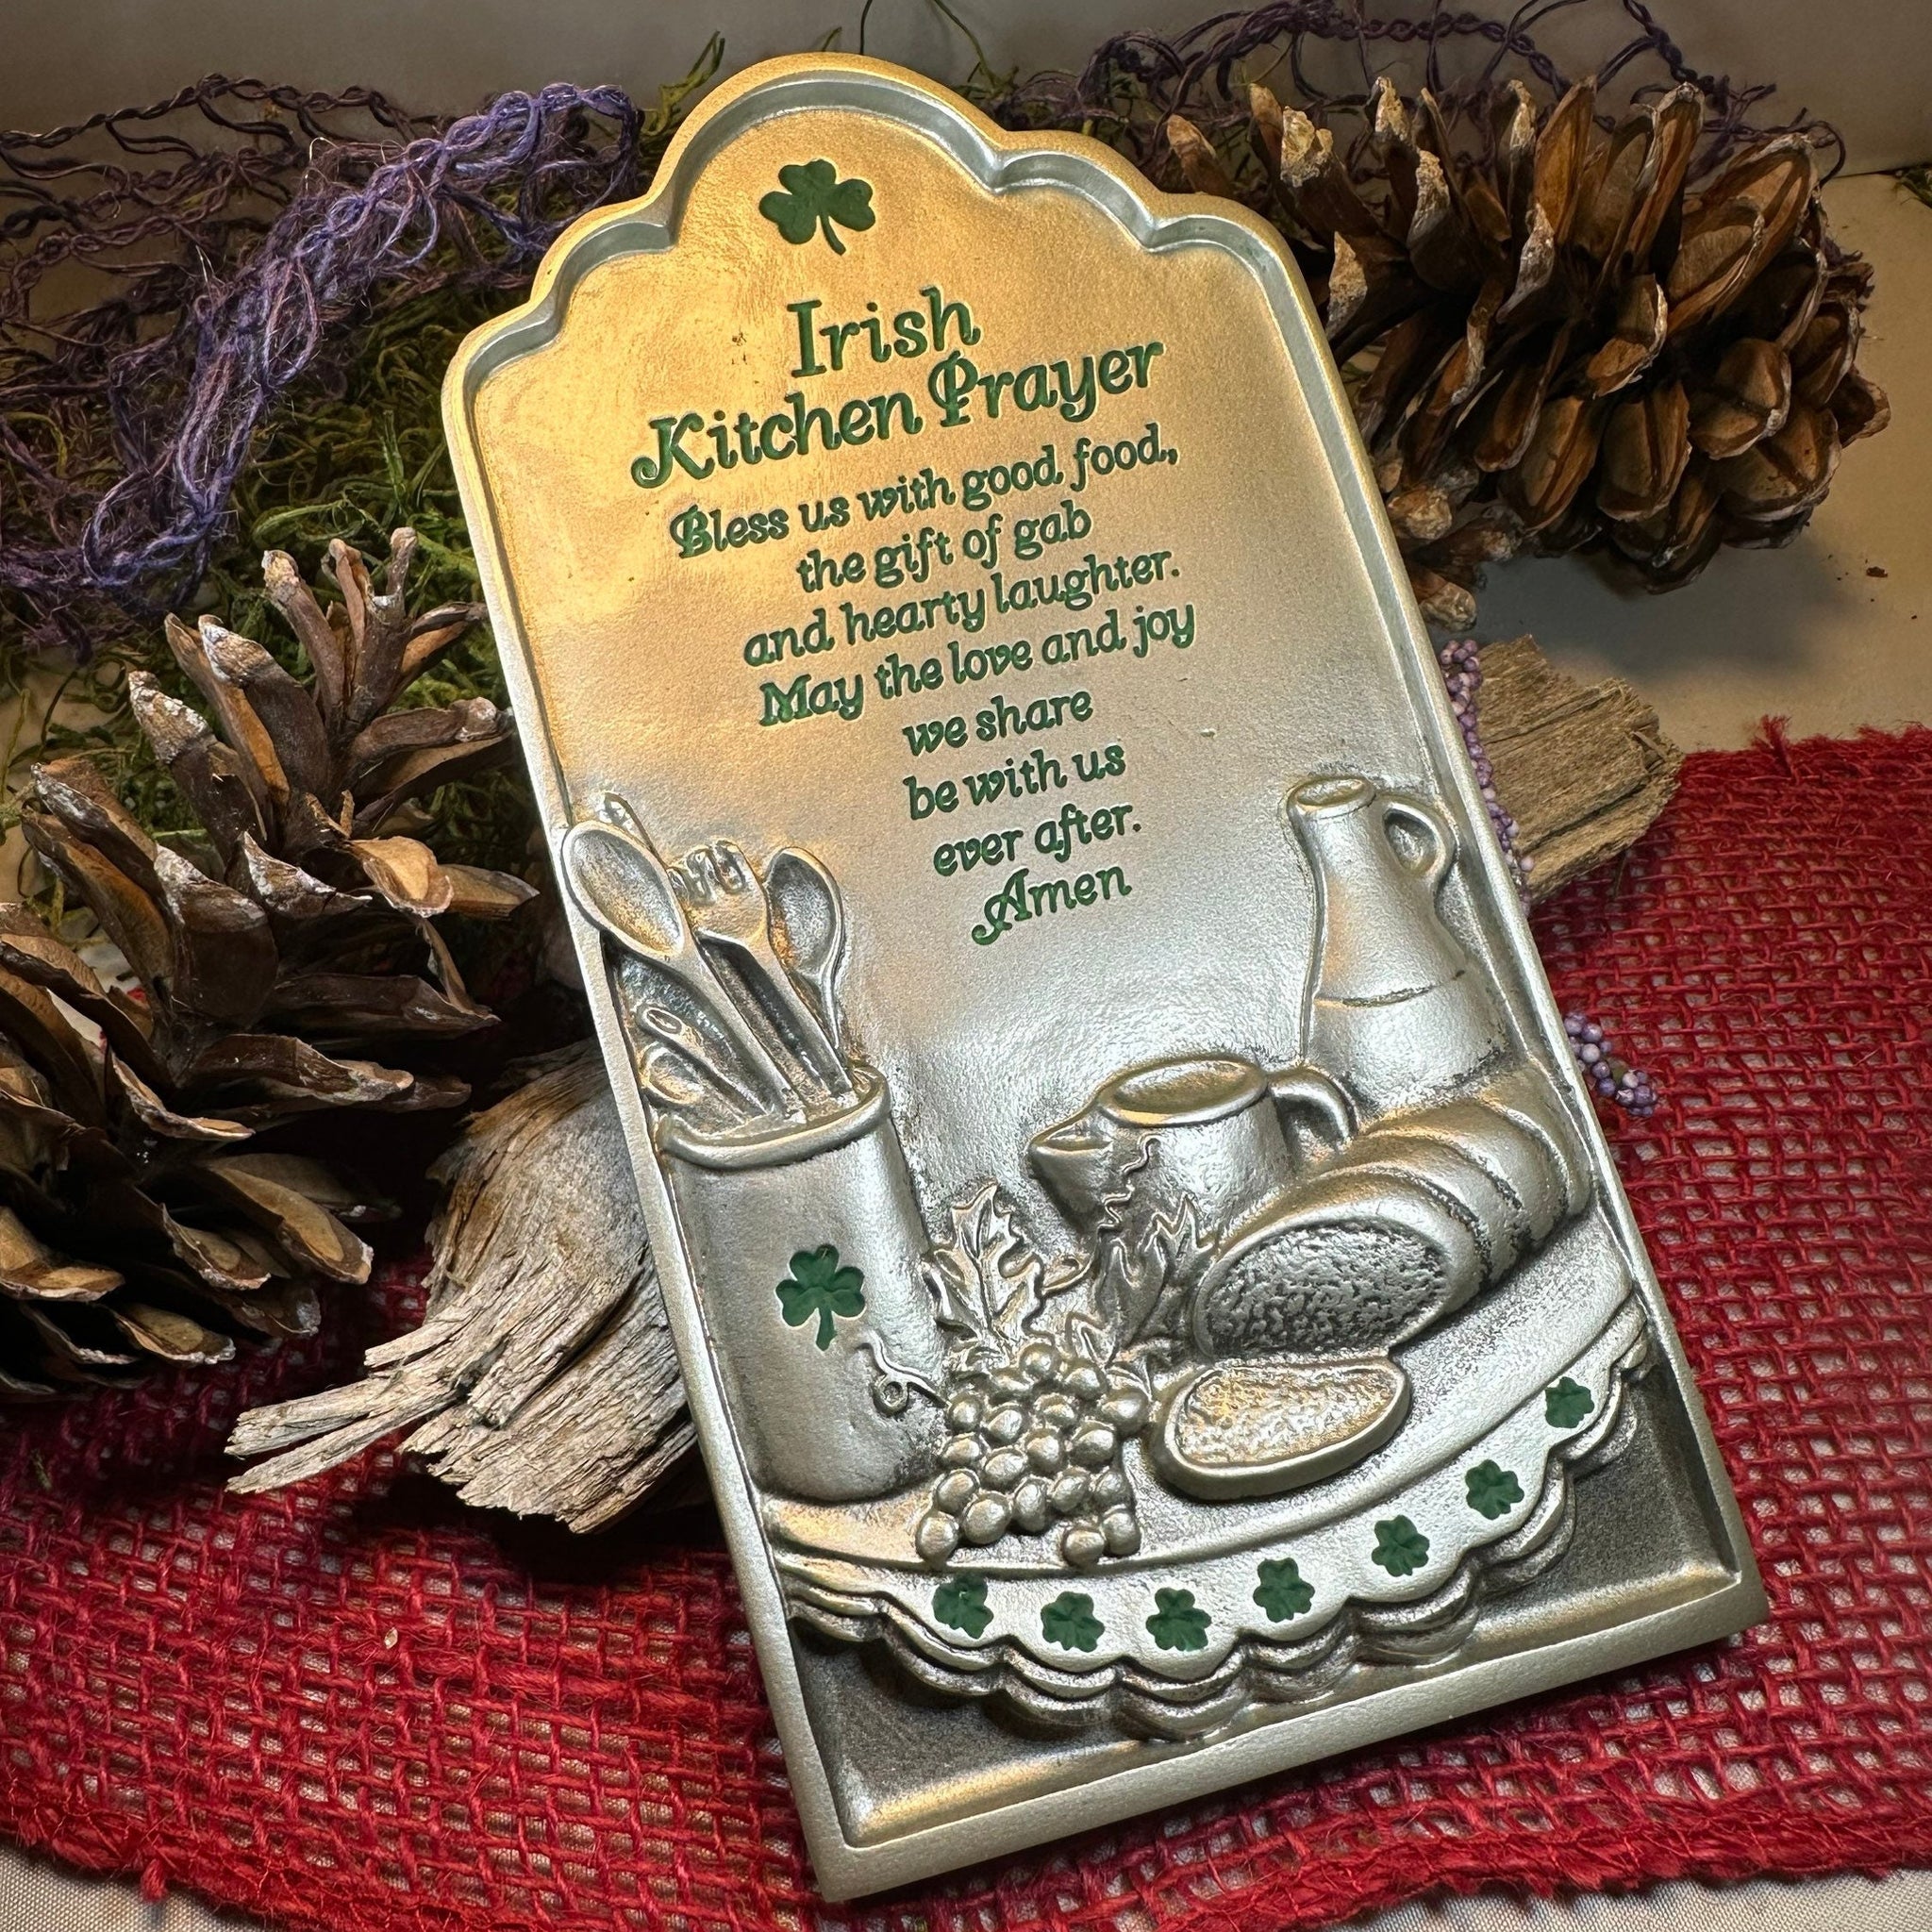 Irish Blessing Kitchen Wall Plaque – Celtic Crystal Design Jewelry